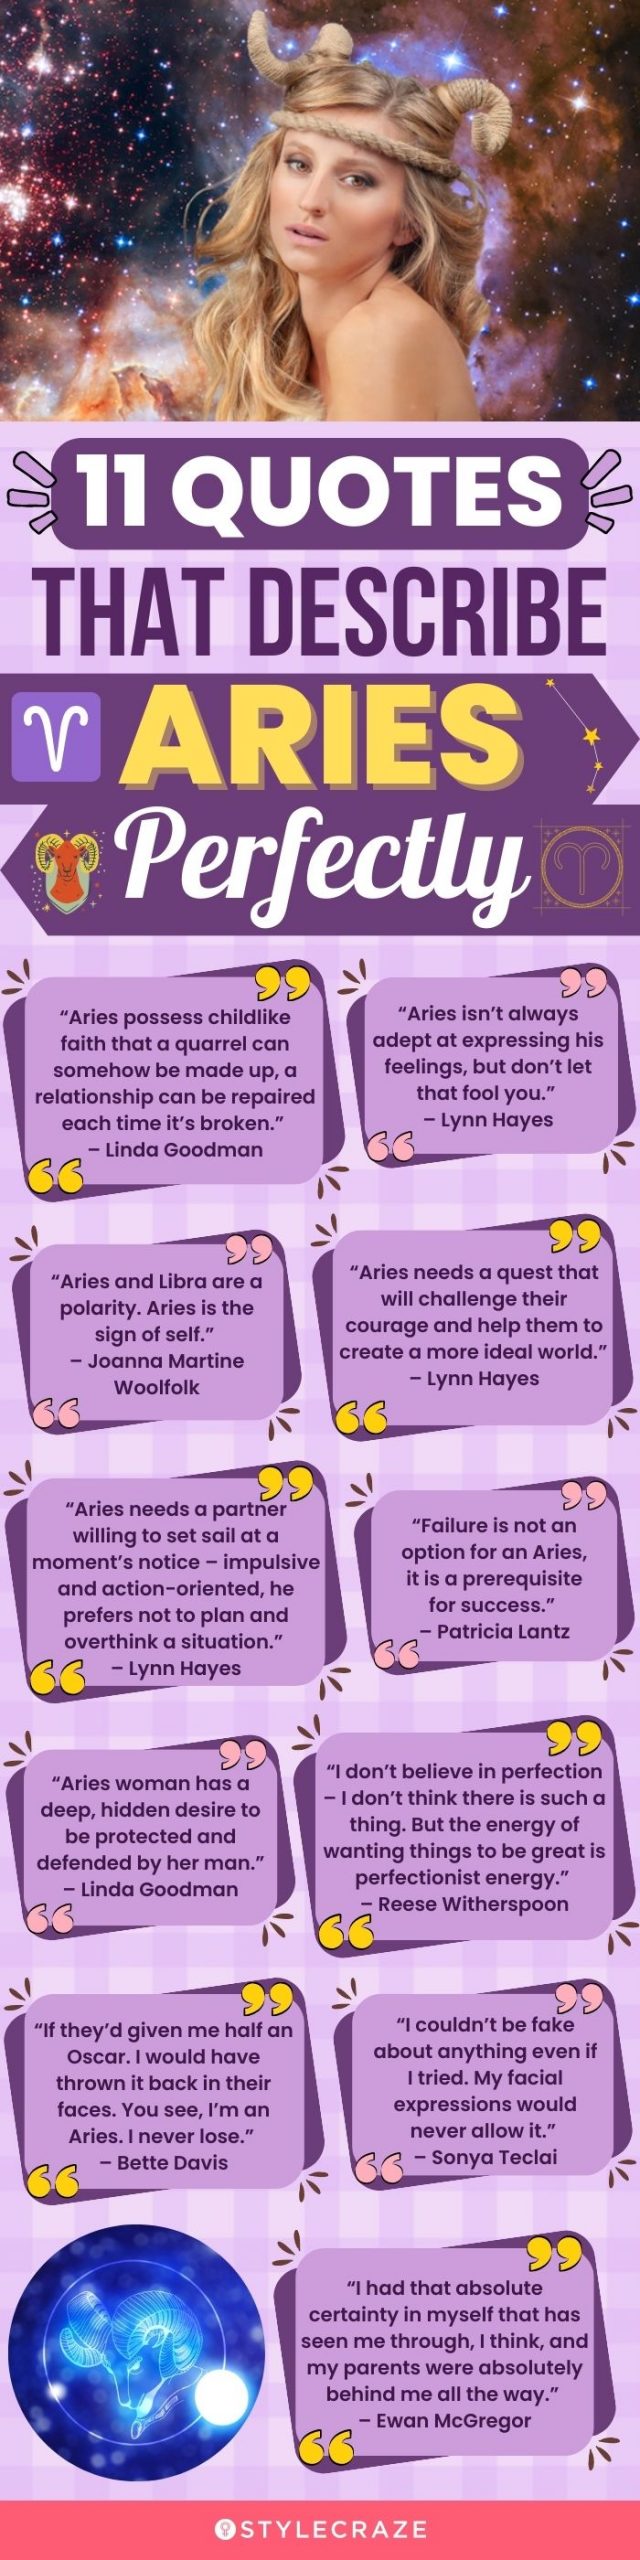 11 quotes that describe aries perfectly (infographic)